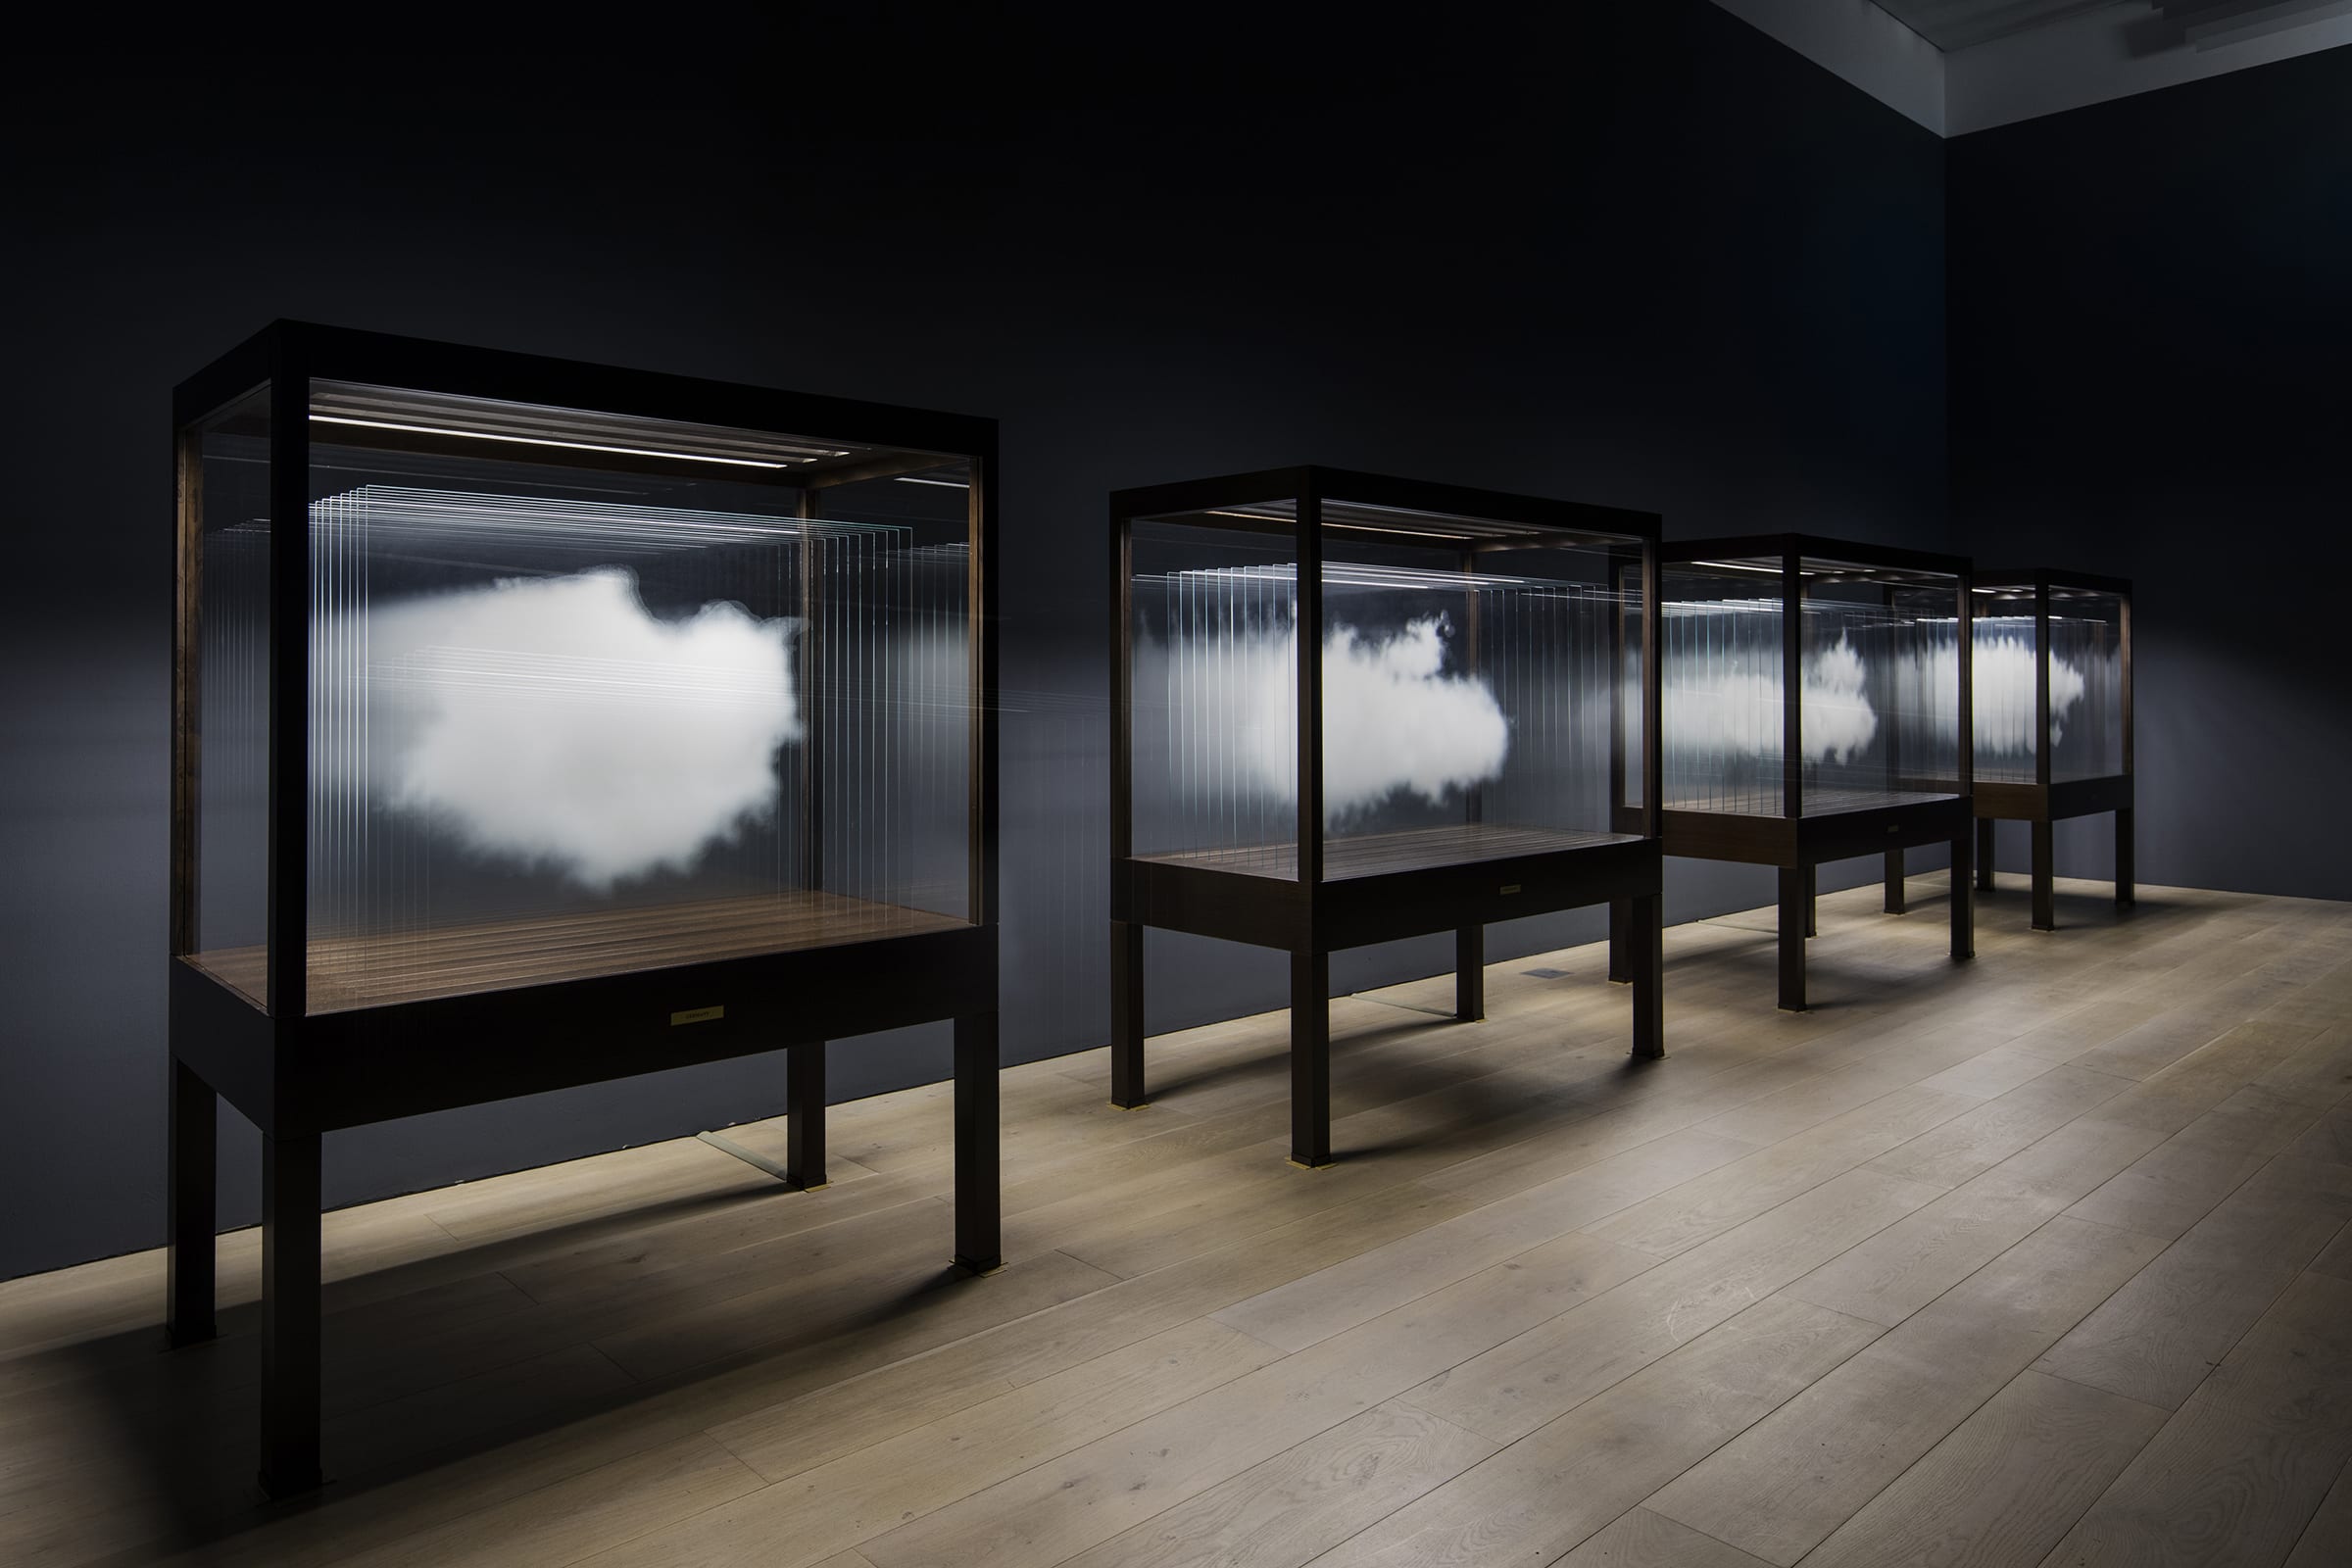 Leandro Erlich, The Cloud - América del Sur, 2018. Installation view at Mori Art Museum, Tokyo, Japan, 2017. Courtesy of Mori Art Museum. Photo by Hasegawa Kenta.